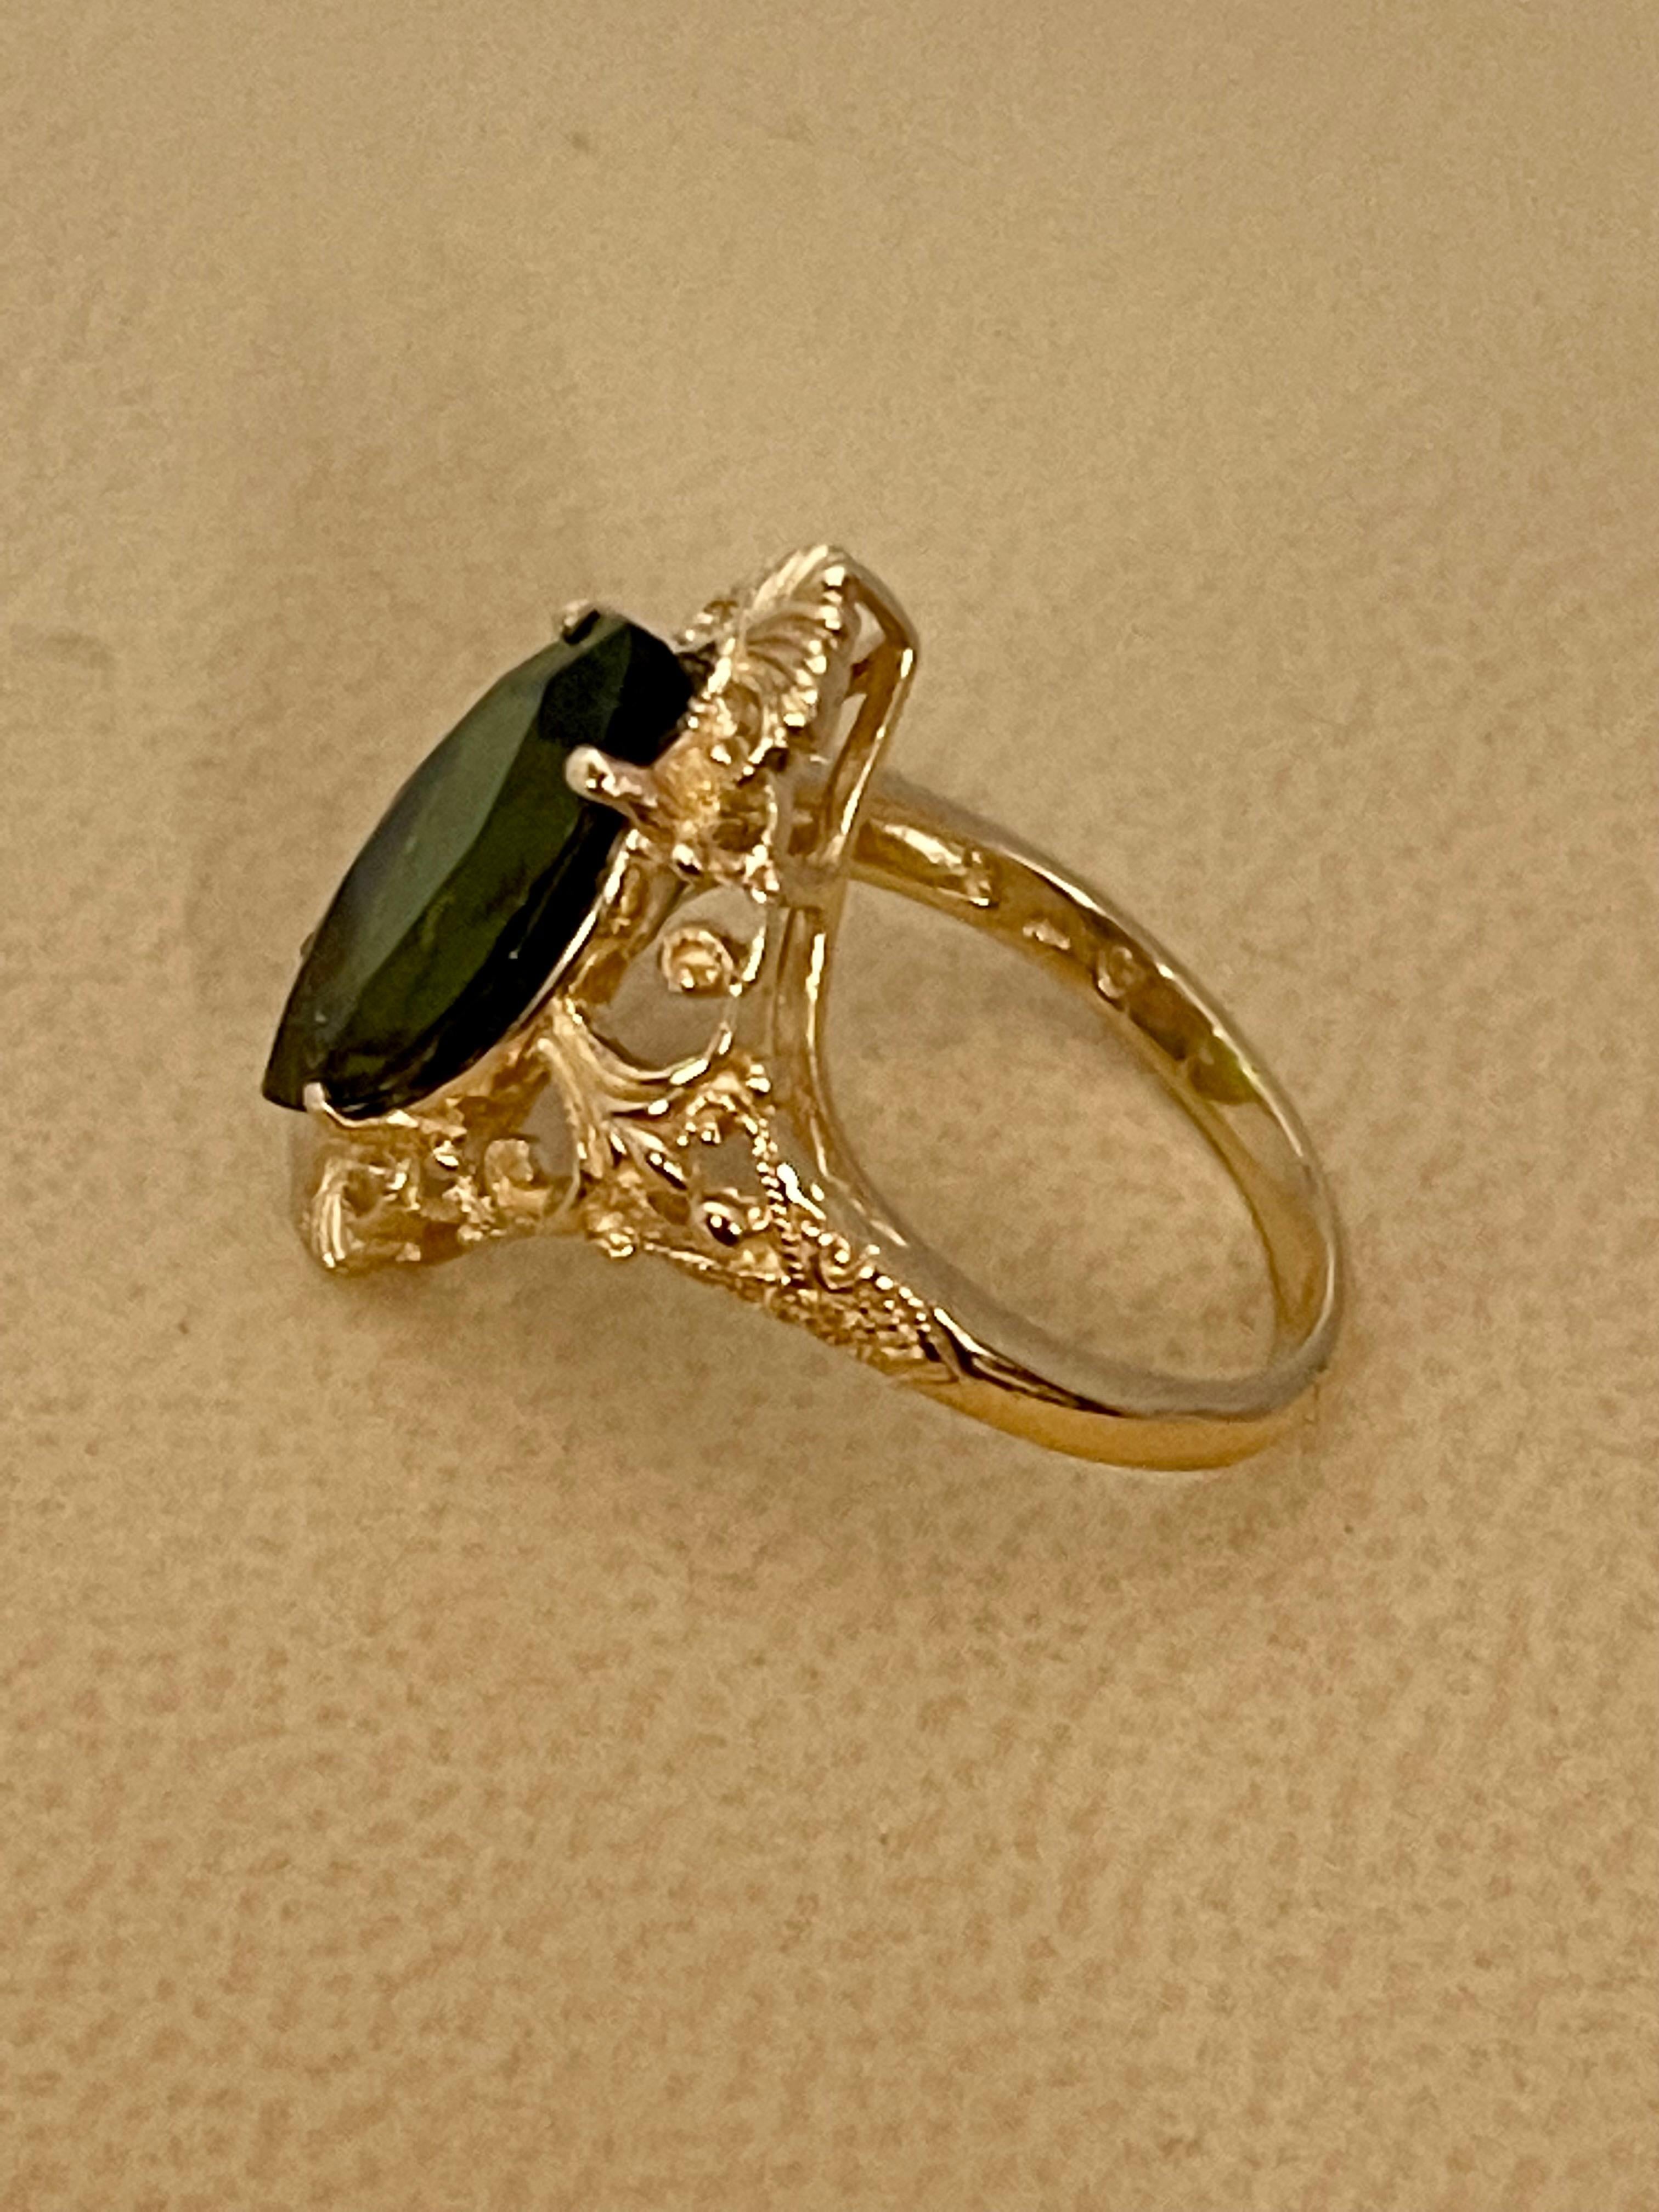 6 Ct Natural Marquise Cut Green Tourmaline Ring in 14 Karat Yellow Gold For Sale 7